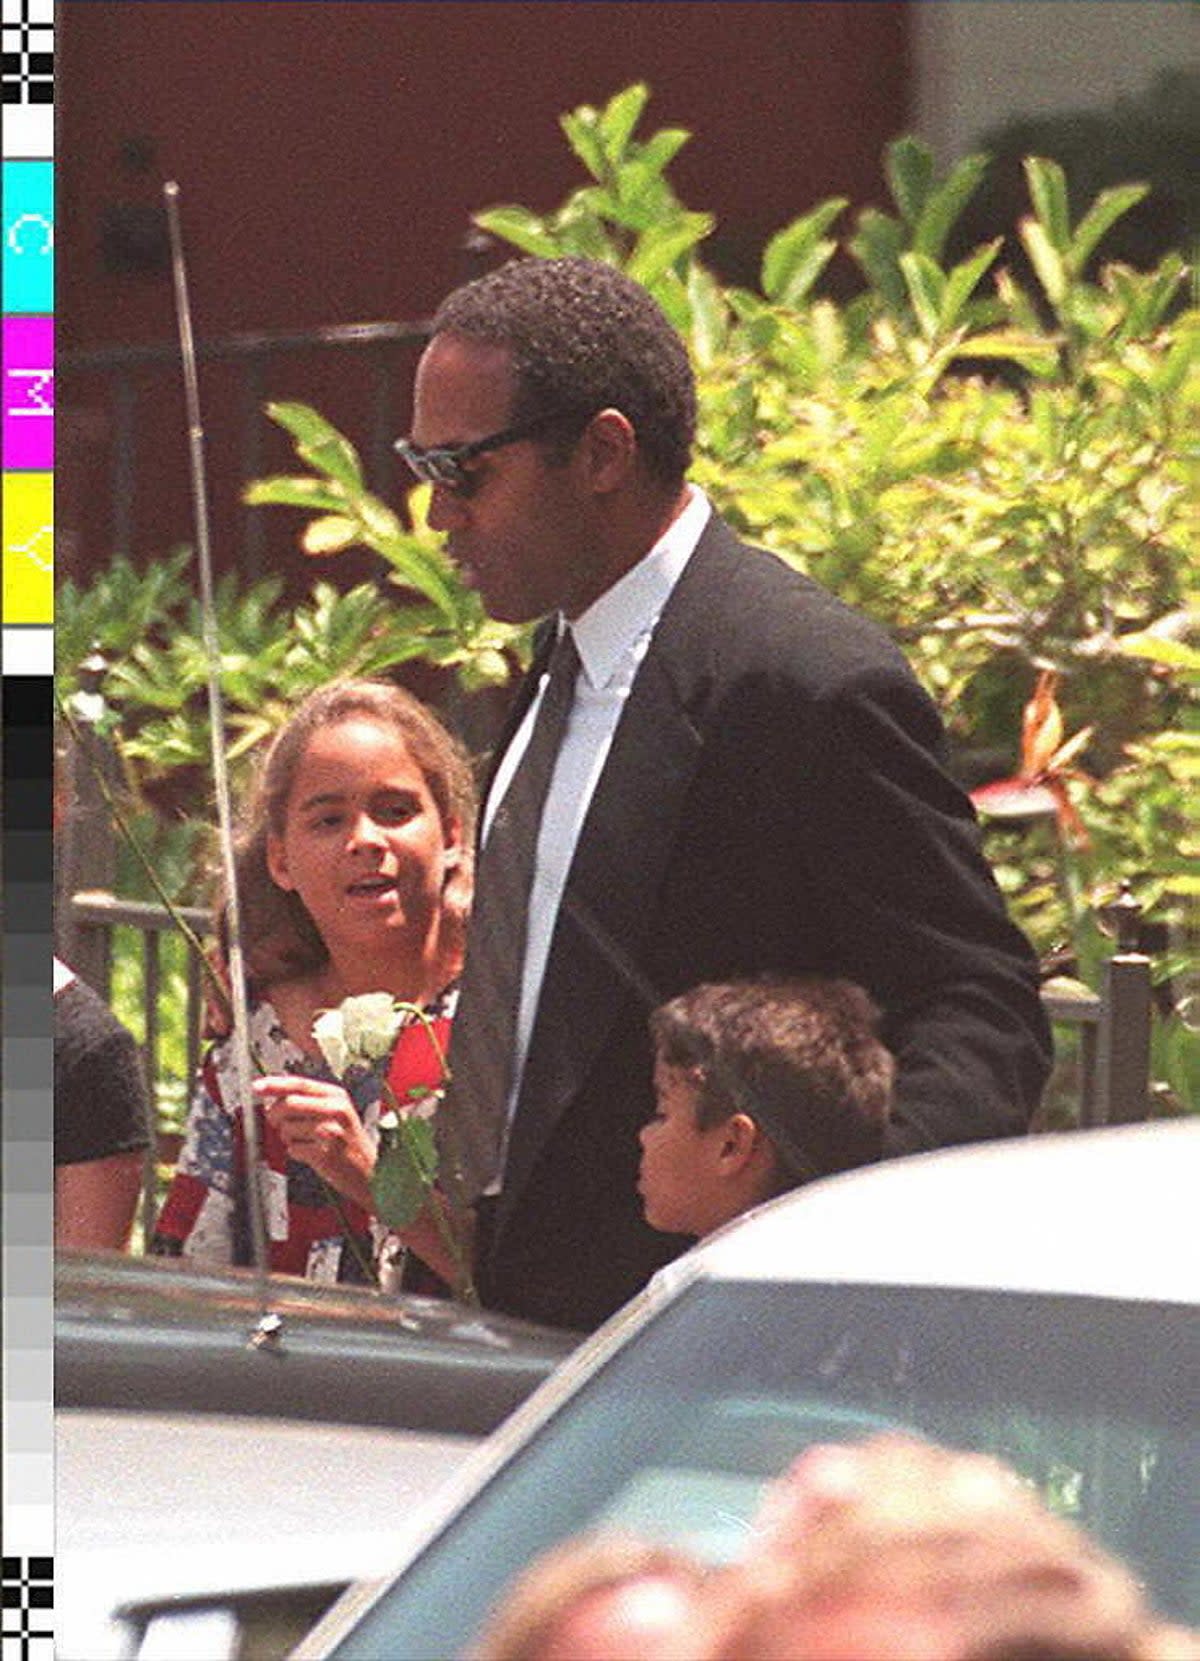 OJ Simpson-  ex-football superstar O.J. Simpson accompanying his children, Sydney, 9 (L) and Justin, 6 (R), as they leave the funeral services for his ex-wife, Nicole Simpson, 16 June 1994 (AFP via Getty Images)